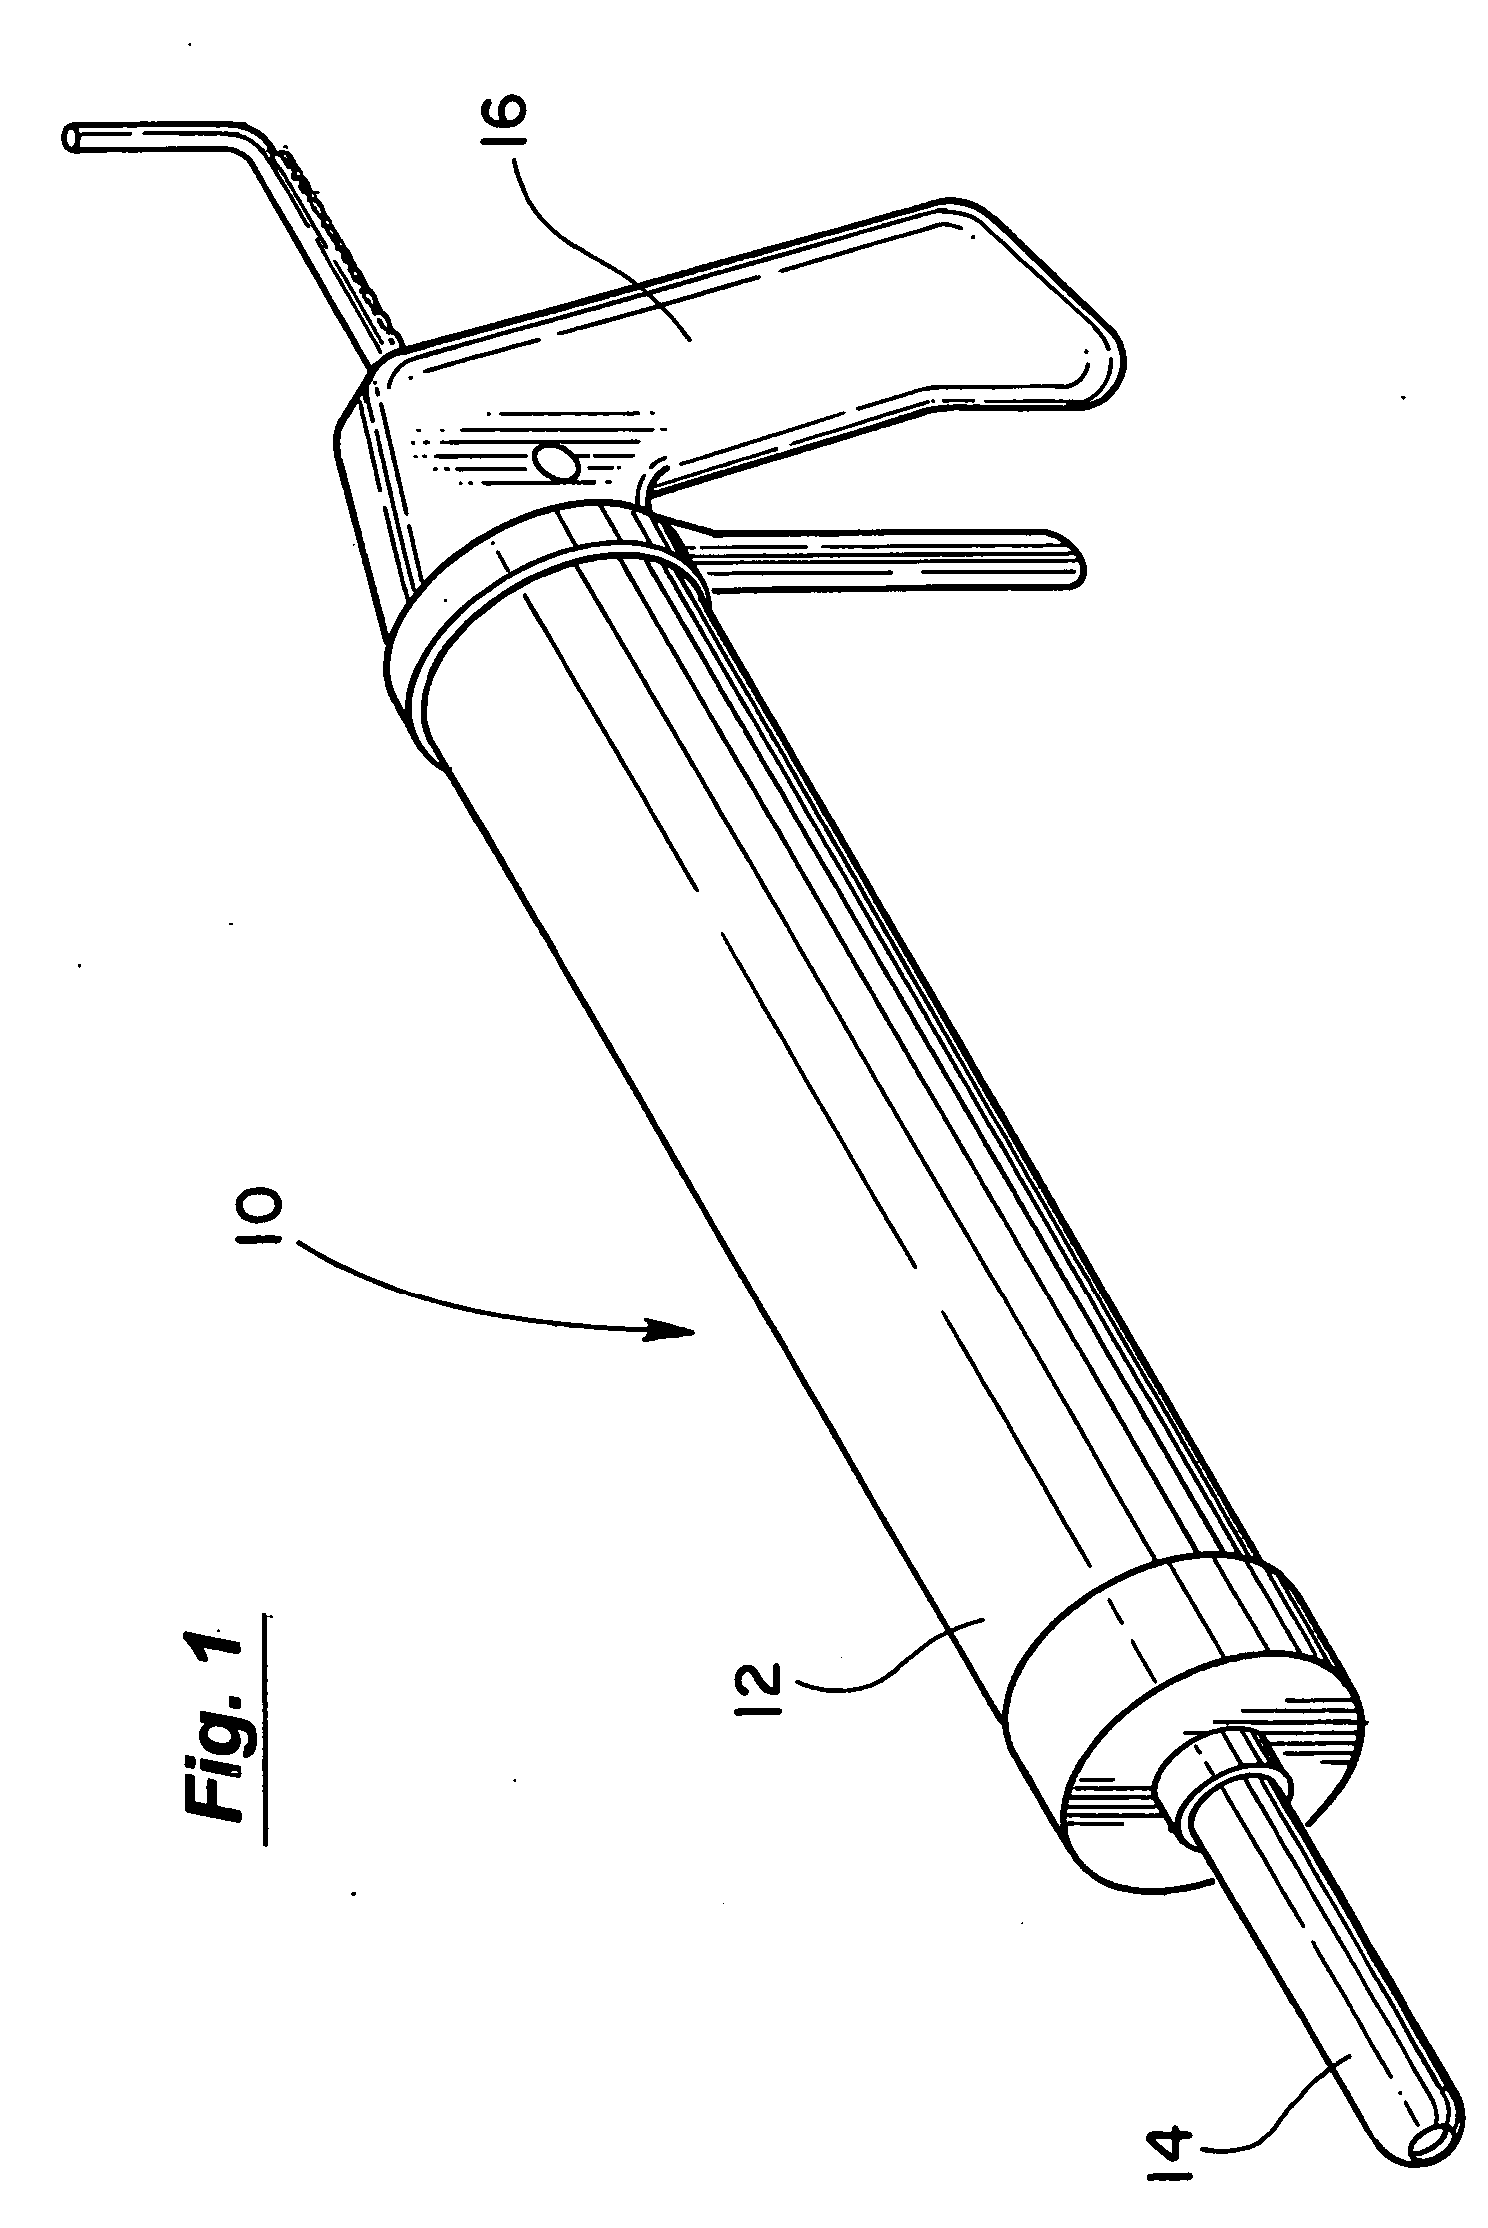 Apparatus and methods for mixing caulk and colorant